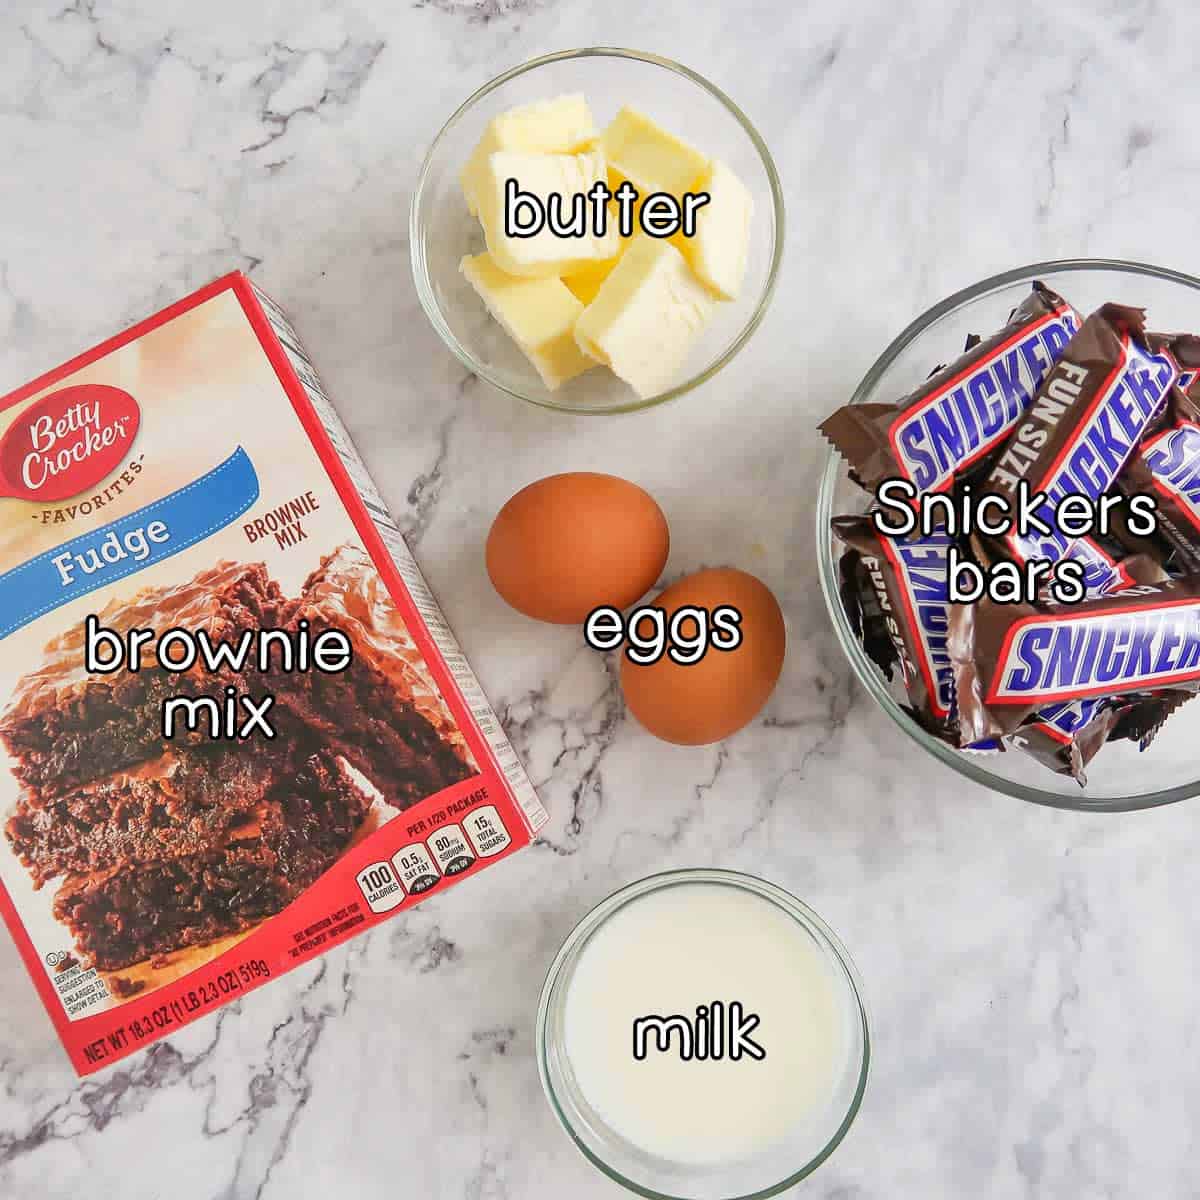 Overhead shot of ingredients - brownie mix, butter, eggs, milk, and snickers bars.